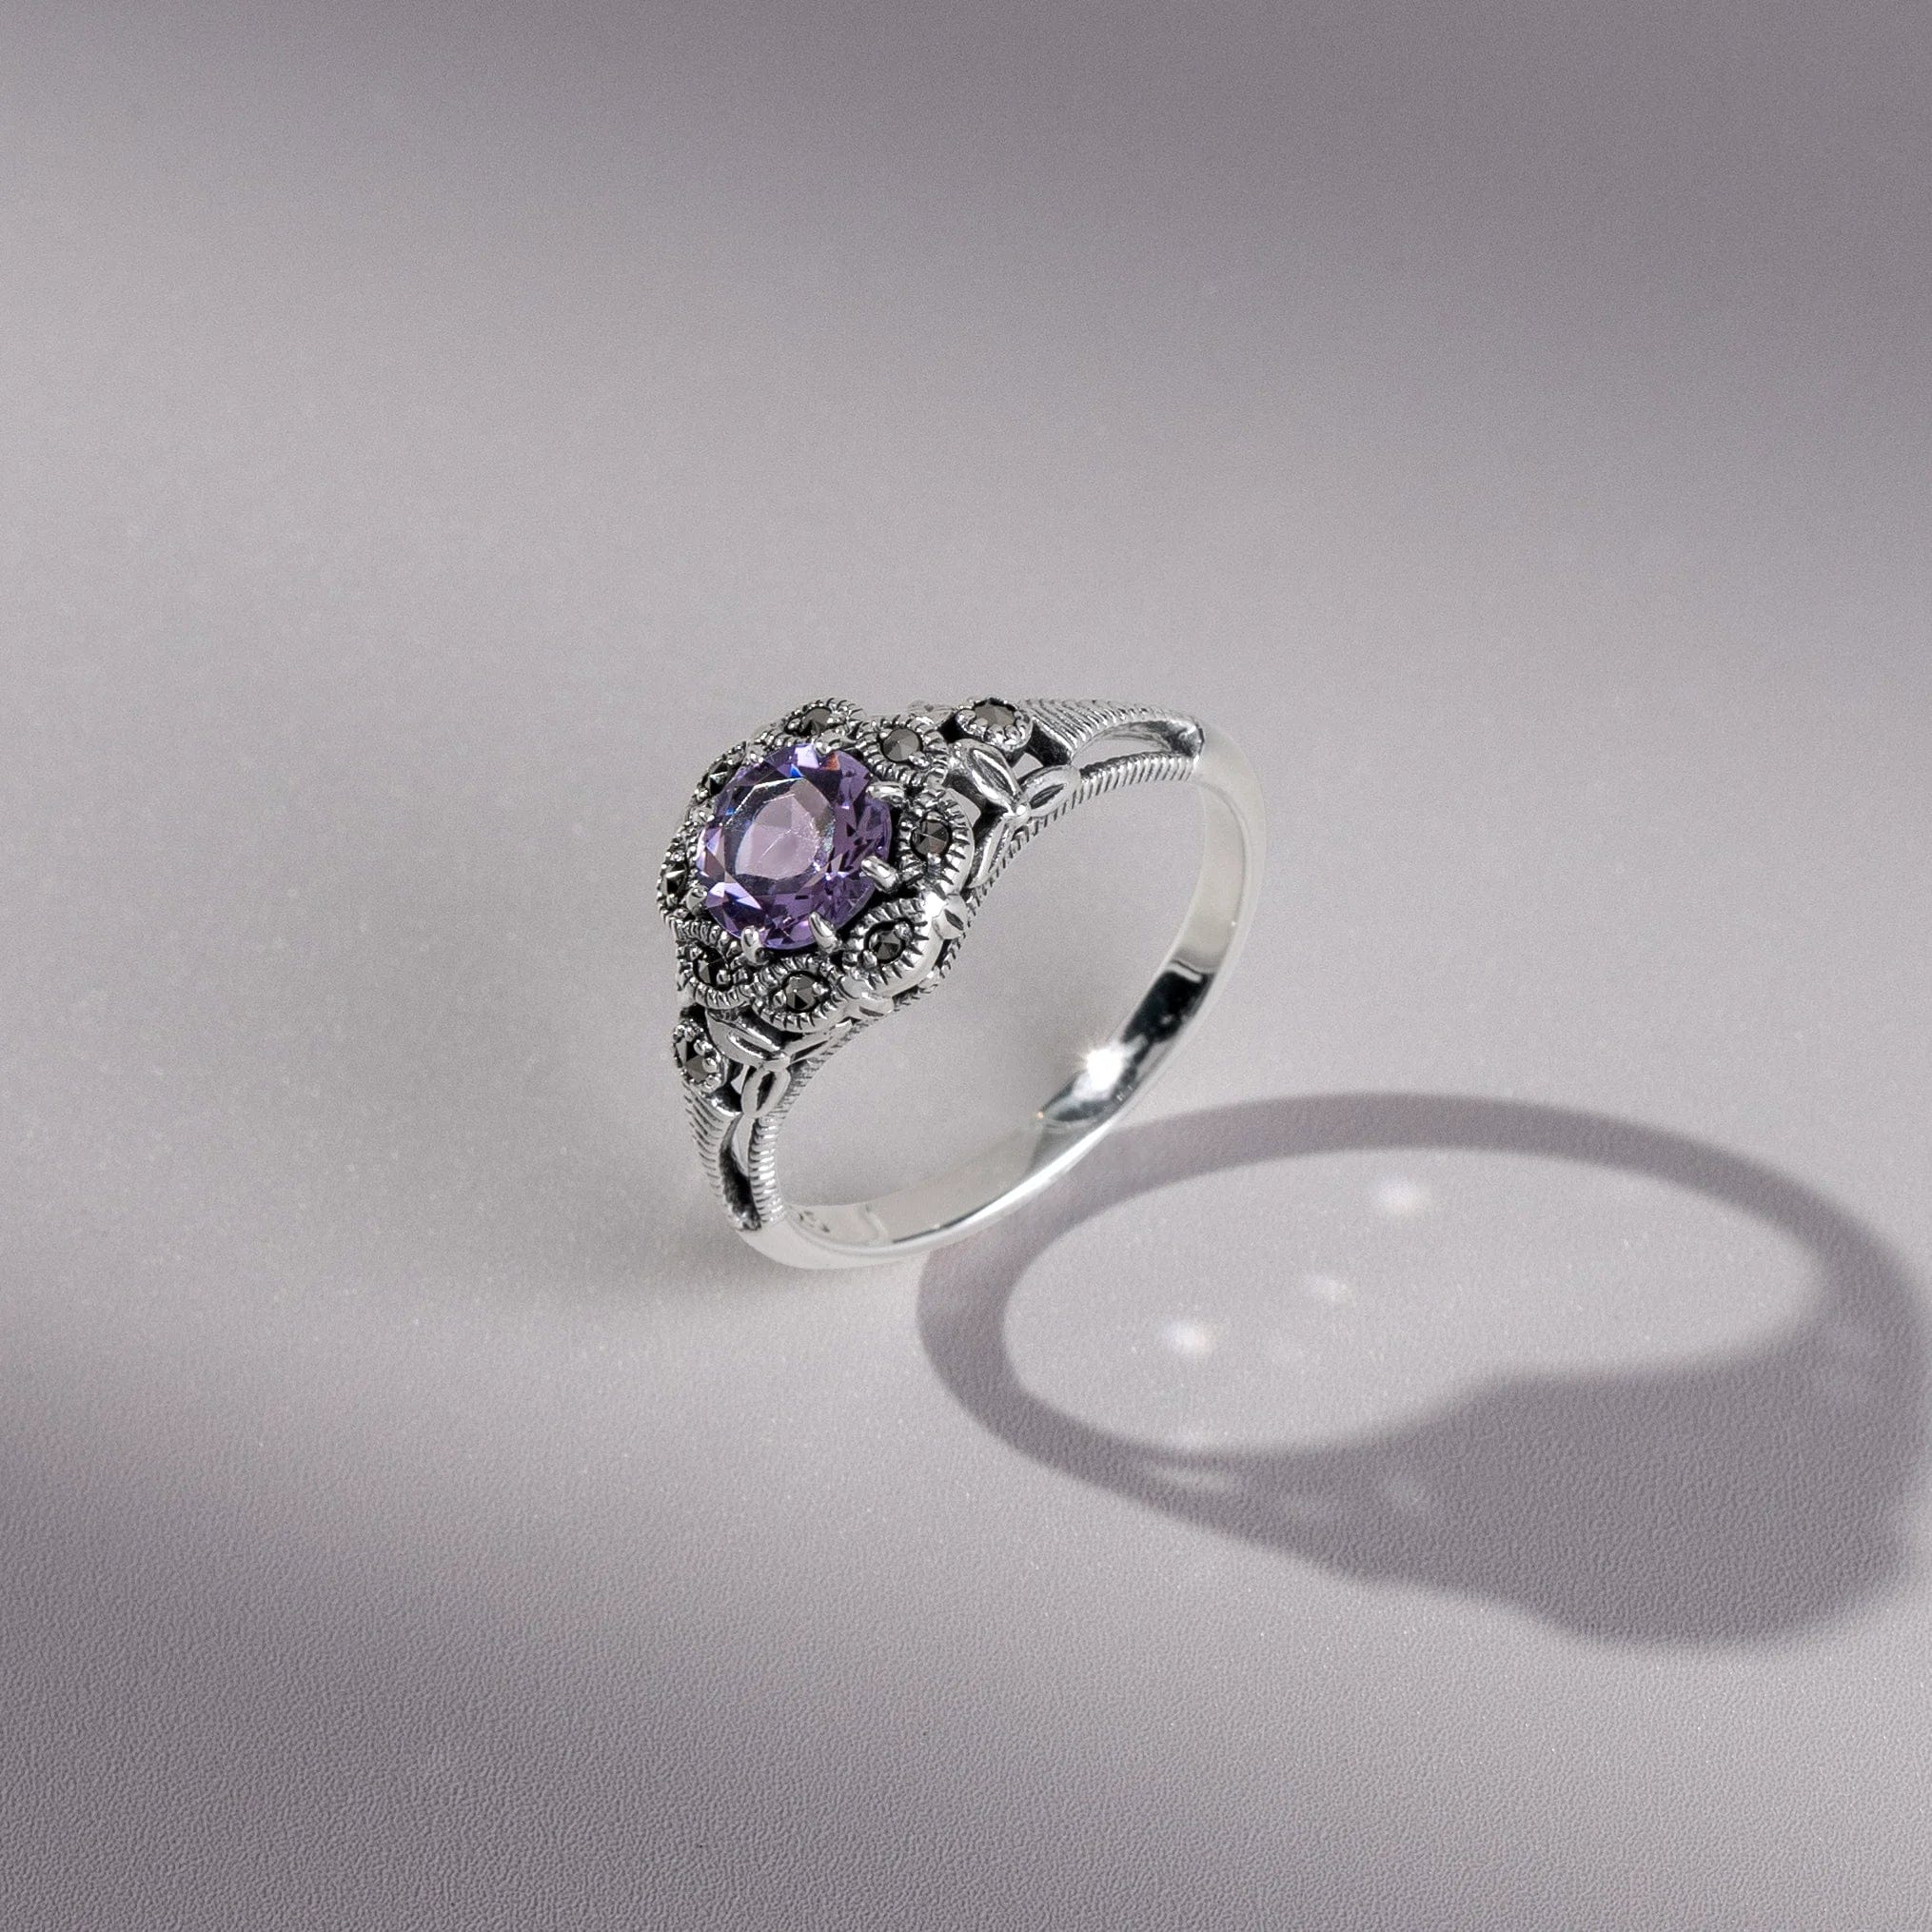 Art Nouveau Style Round Amethyst & Marcasite Floral Ring in Sterling Silver